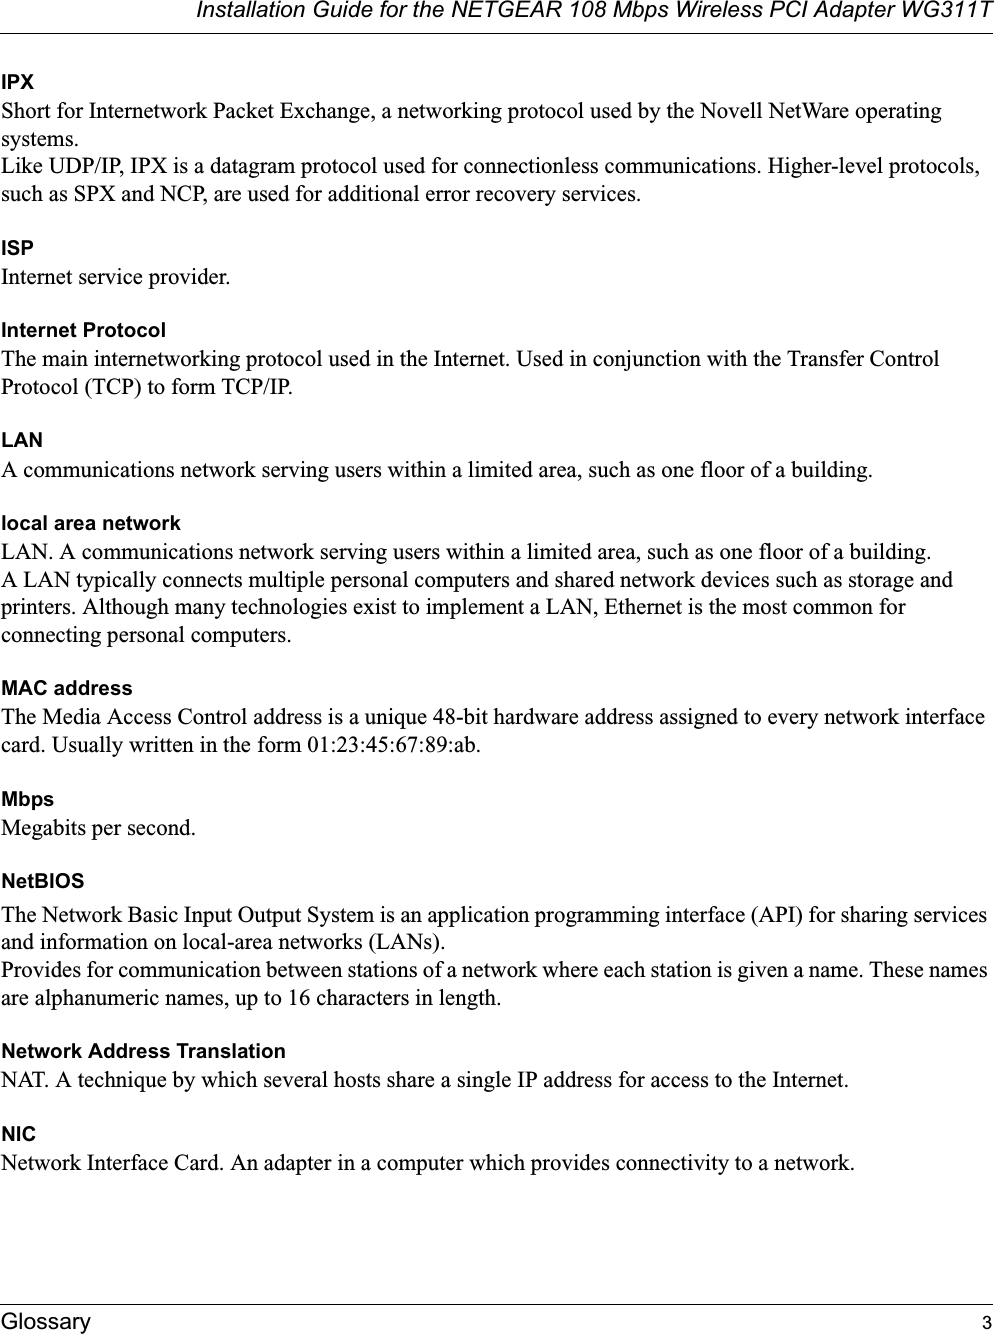 Installation Guide for the NETGEAR 108 Mbps Wireless PCI Adapter WG311TGlossary 3IPXShort for Internetwork Packet Exchange, a networking protocol used by the Novell NetWare operating systems. Like UDP/IP, IPX is a datagram protocol used for connectionless communications. Higher-level protocols, such as SPX and NCP, are used for additional error recovery services. ISPInternet service provider.Internet ProtocolThe main internetworking protocol used in the Internet. Used in conjunction with the Transfer Control Protocol (TCP) to form TCP/IP.LANA communications network serving users within a limited area, such as one floor of a building.local area networkLAN. A communications network serving users within a limited area, such as one floor of a building. A LAN typically connects multiple personal computers and shared network devices such as storage and printers. Although many technologies exist to implement a LAN, Ethernet is the most common for connecting personal computers.MAC addressThe Media Access Control address is a unique 48-bit hardware address assigned to every network interface card. Usually written in the form 01:23:45:67:89:ab.MbpsMegabits per second.NetBIOSThe Network Basic Input Output System is an application programming interface (API) for sharing services and information on local-area networks (LANs). Provides for communication between stations of a network where each station is given a name. These names are alphanumeric names, up to 16 characters in length. Network Address TranslationNAT. A technique by which several hosts share a single IP address for access to the Internet.NICNetwork Interface Card. An adapter in a computer which provides connectivity to a network.